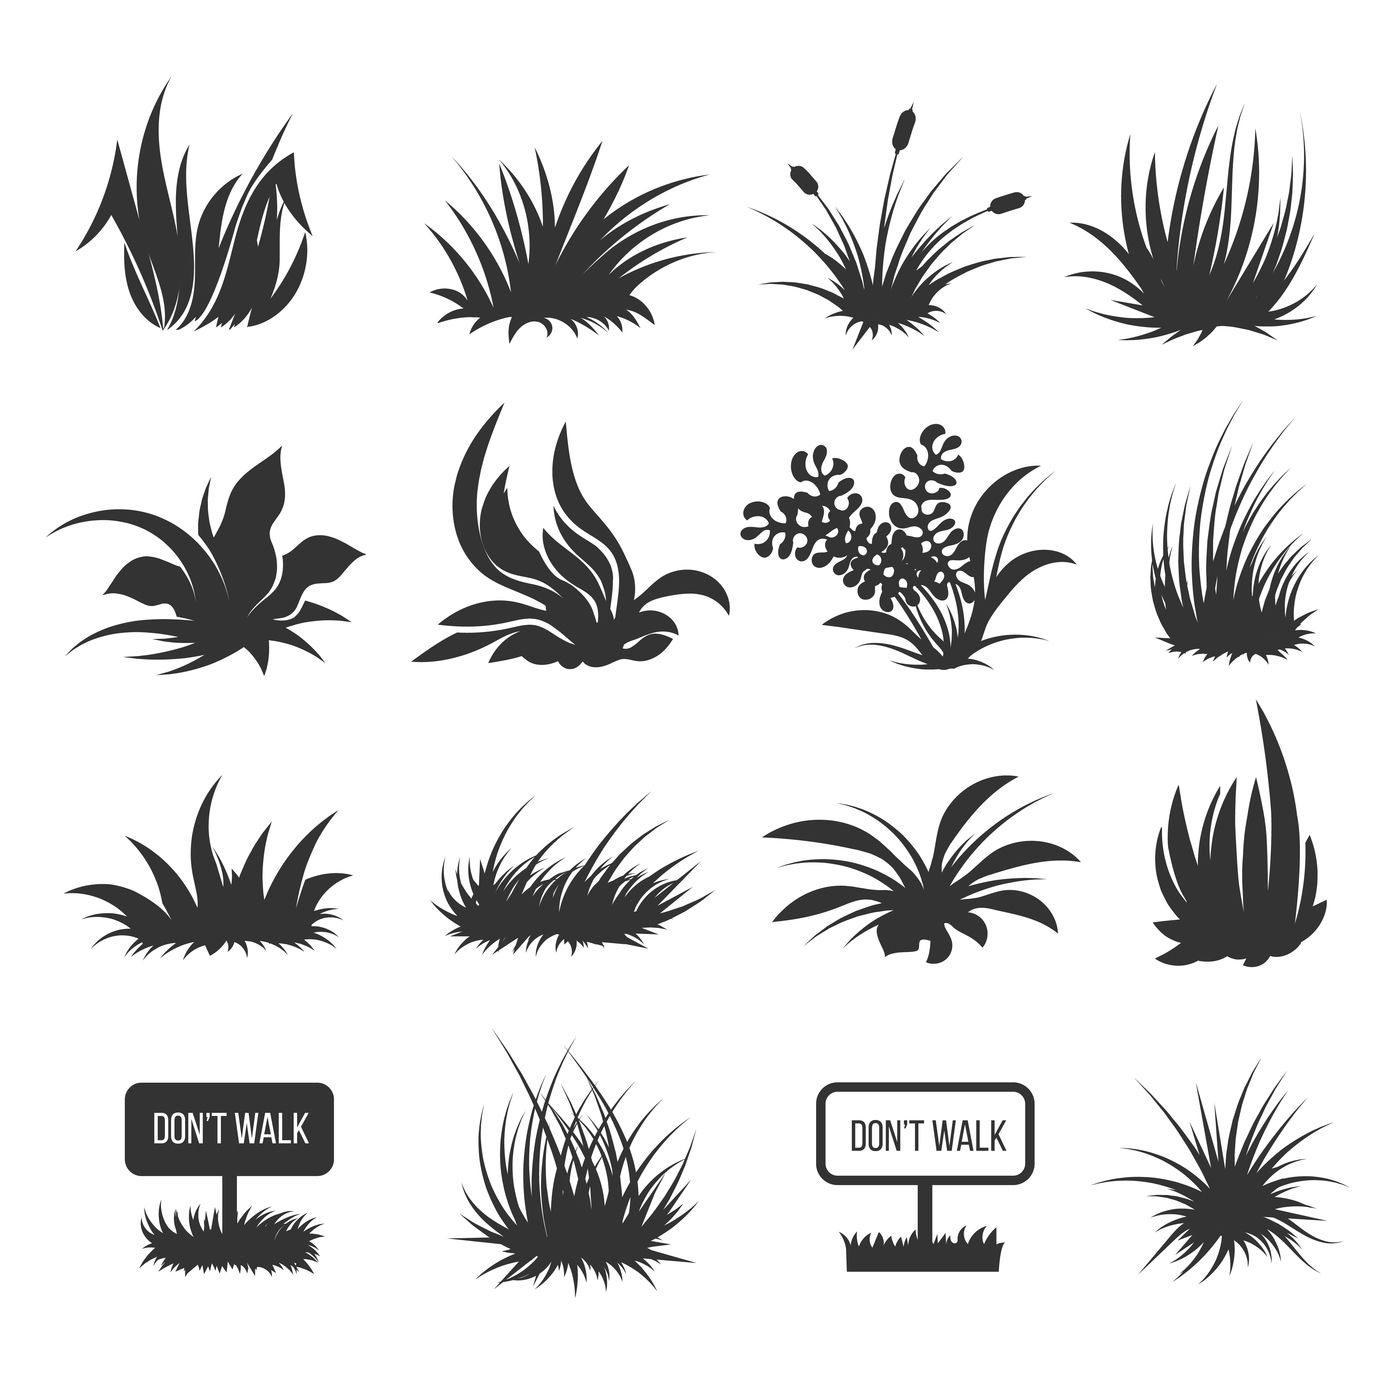 Download Grass and lawn vector silhouettes By Microvector ...